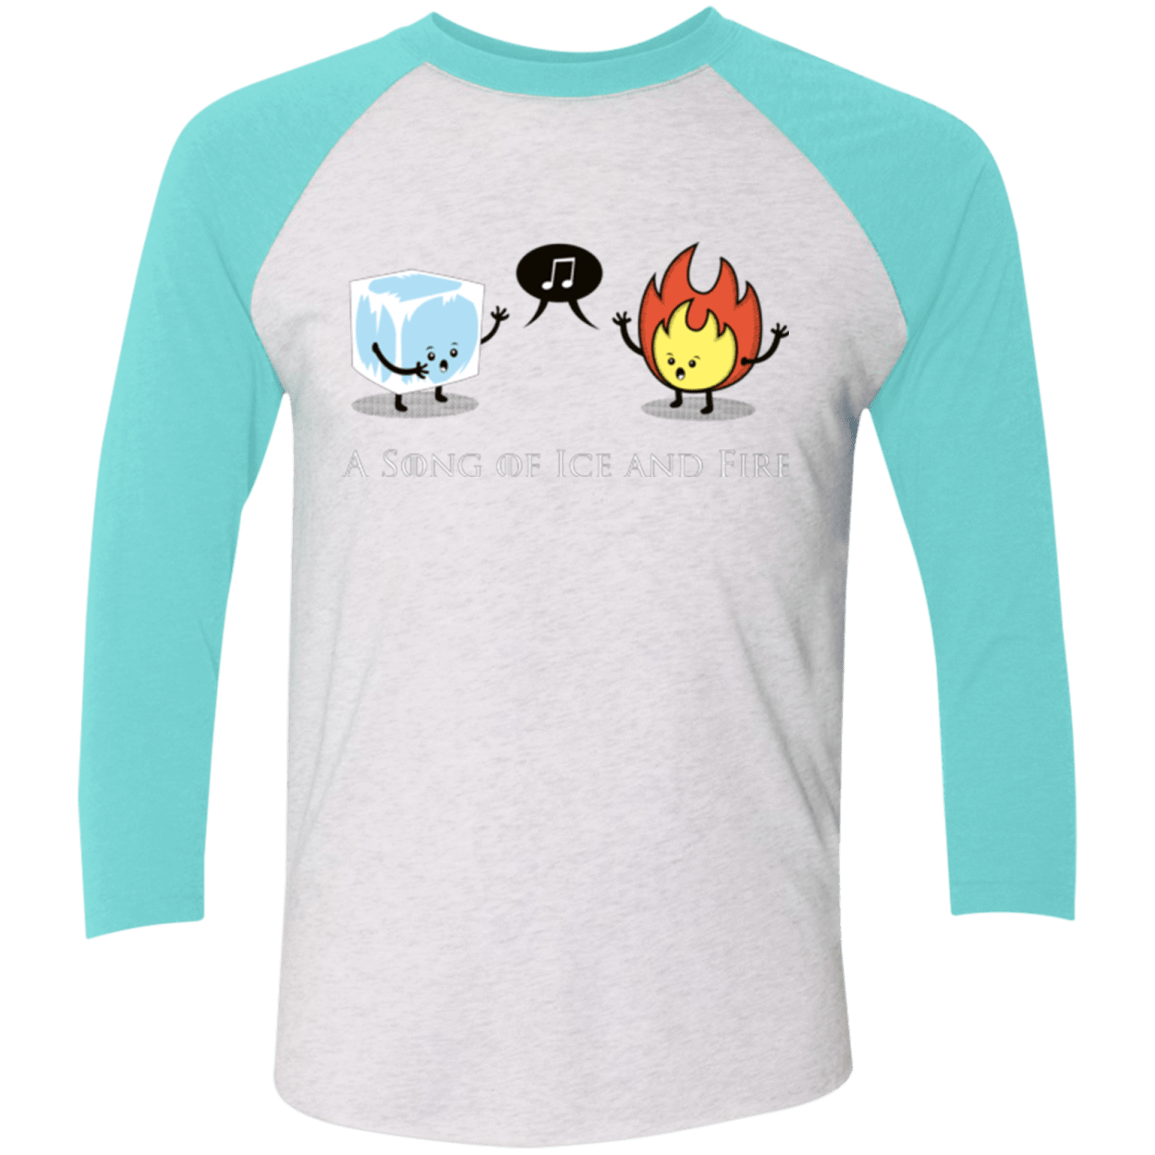 T-Shirts Heather White/Tahiti Blue / X-Small A Song of Ice and Fire Men's Triblend 3/4 Sleeve